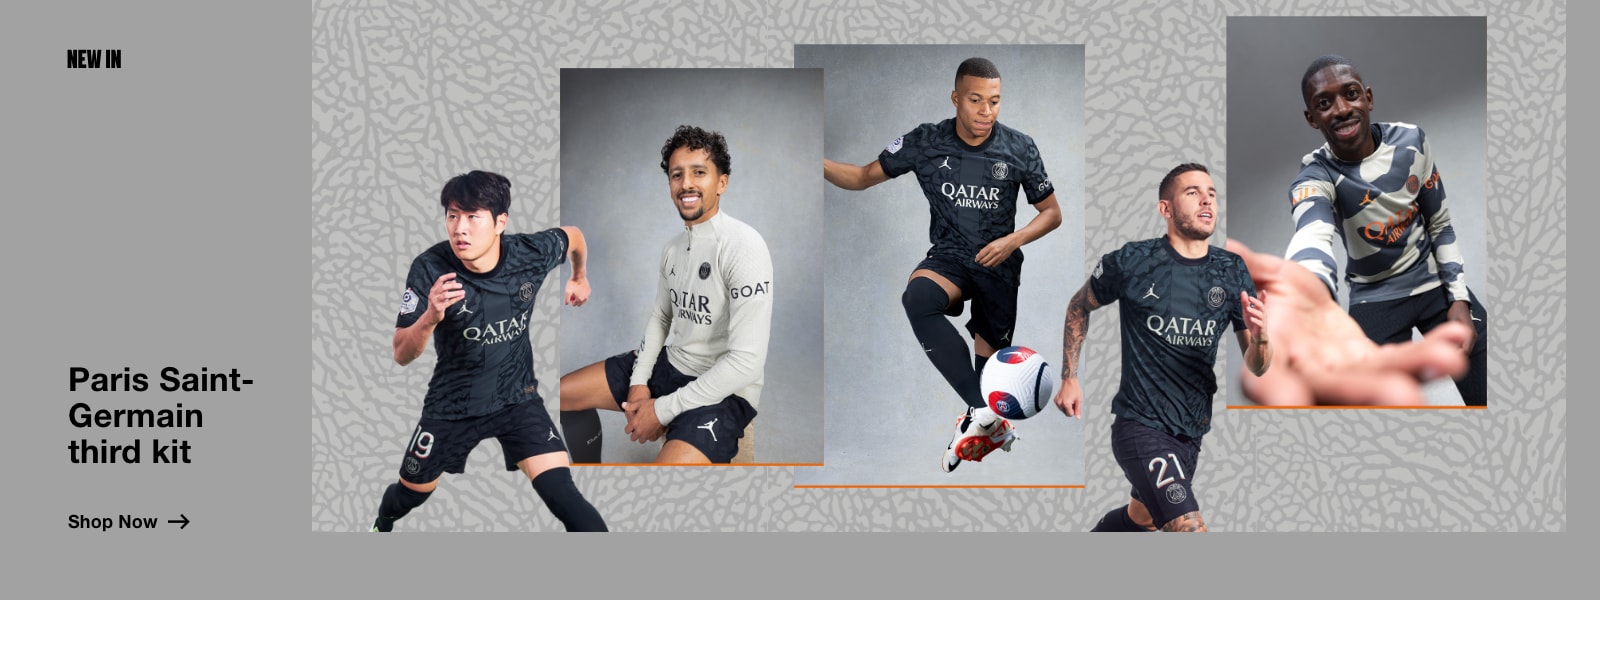 NEW IN PSG THIRD KIT. SHOP NOW.